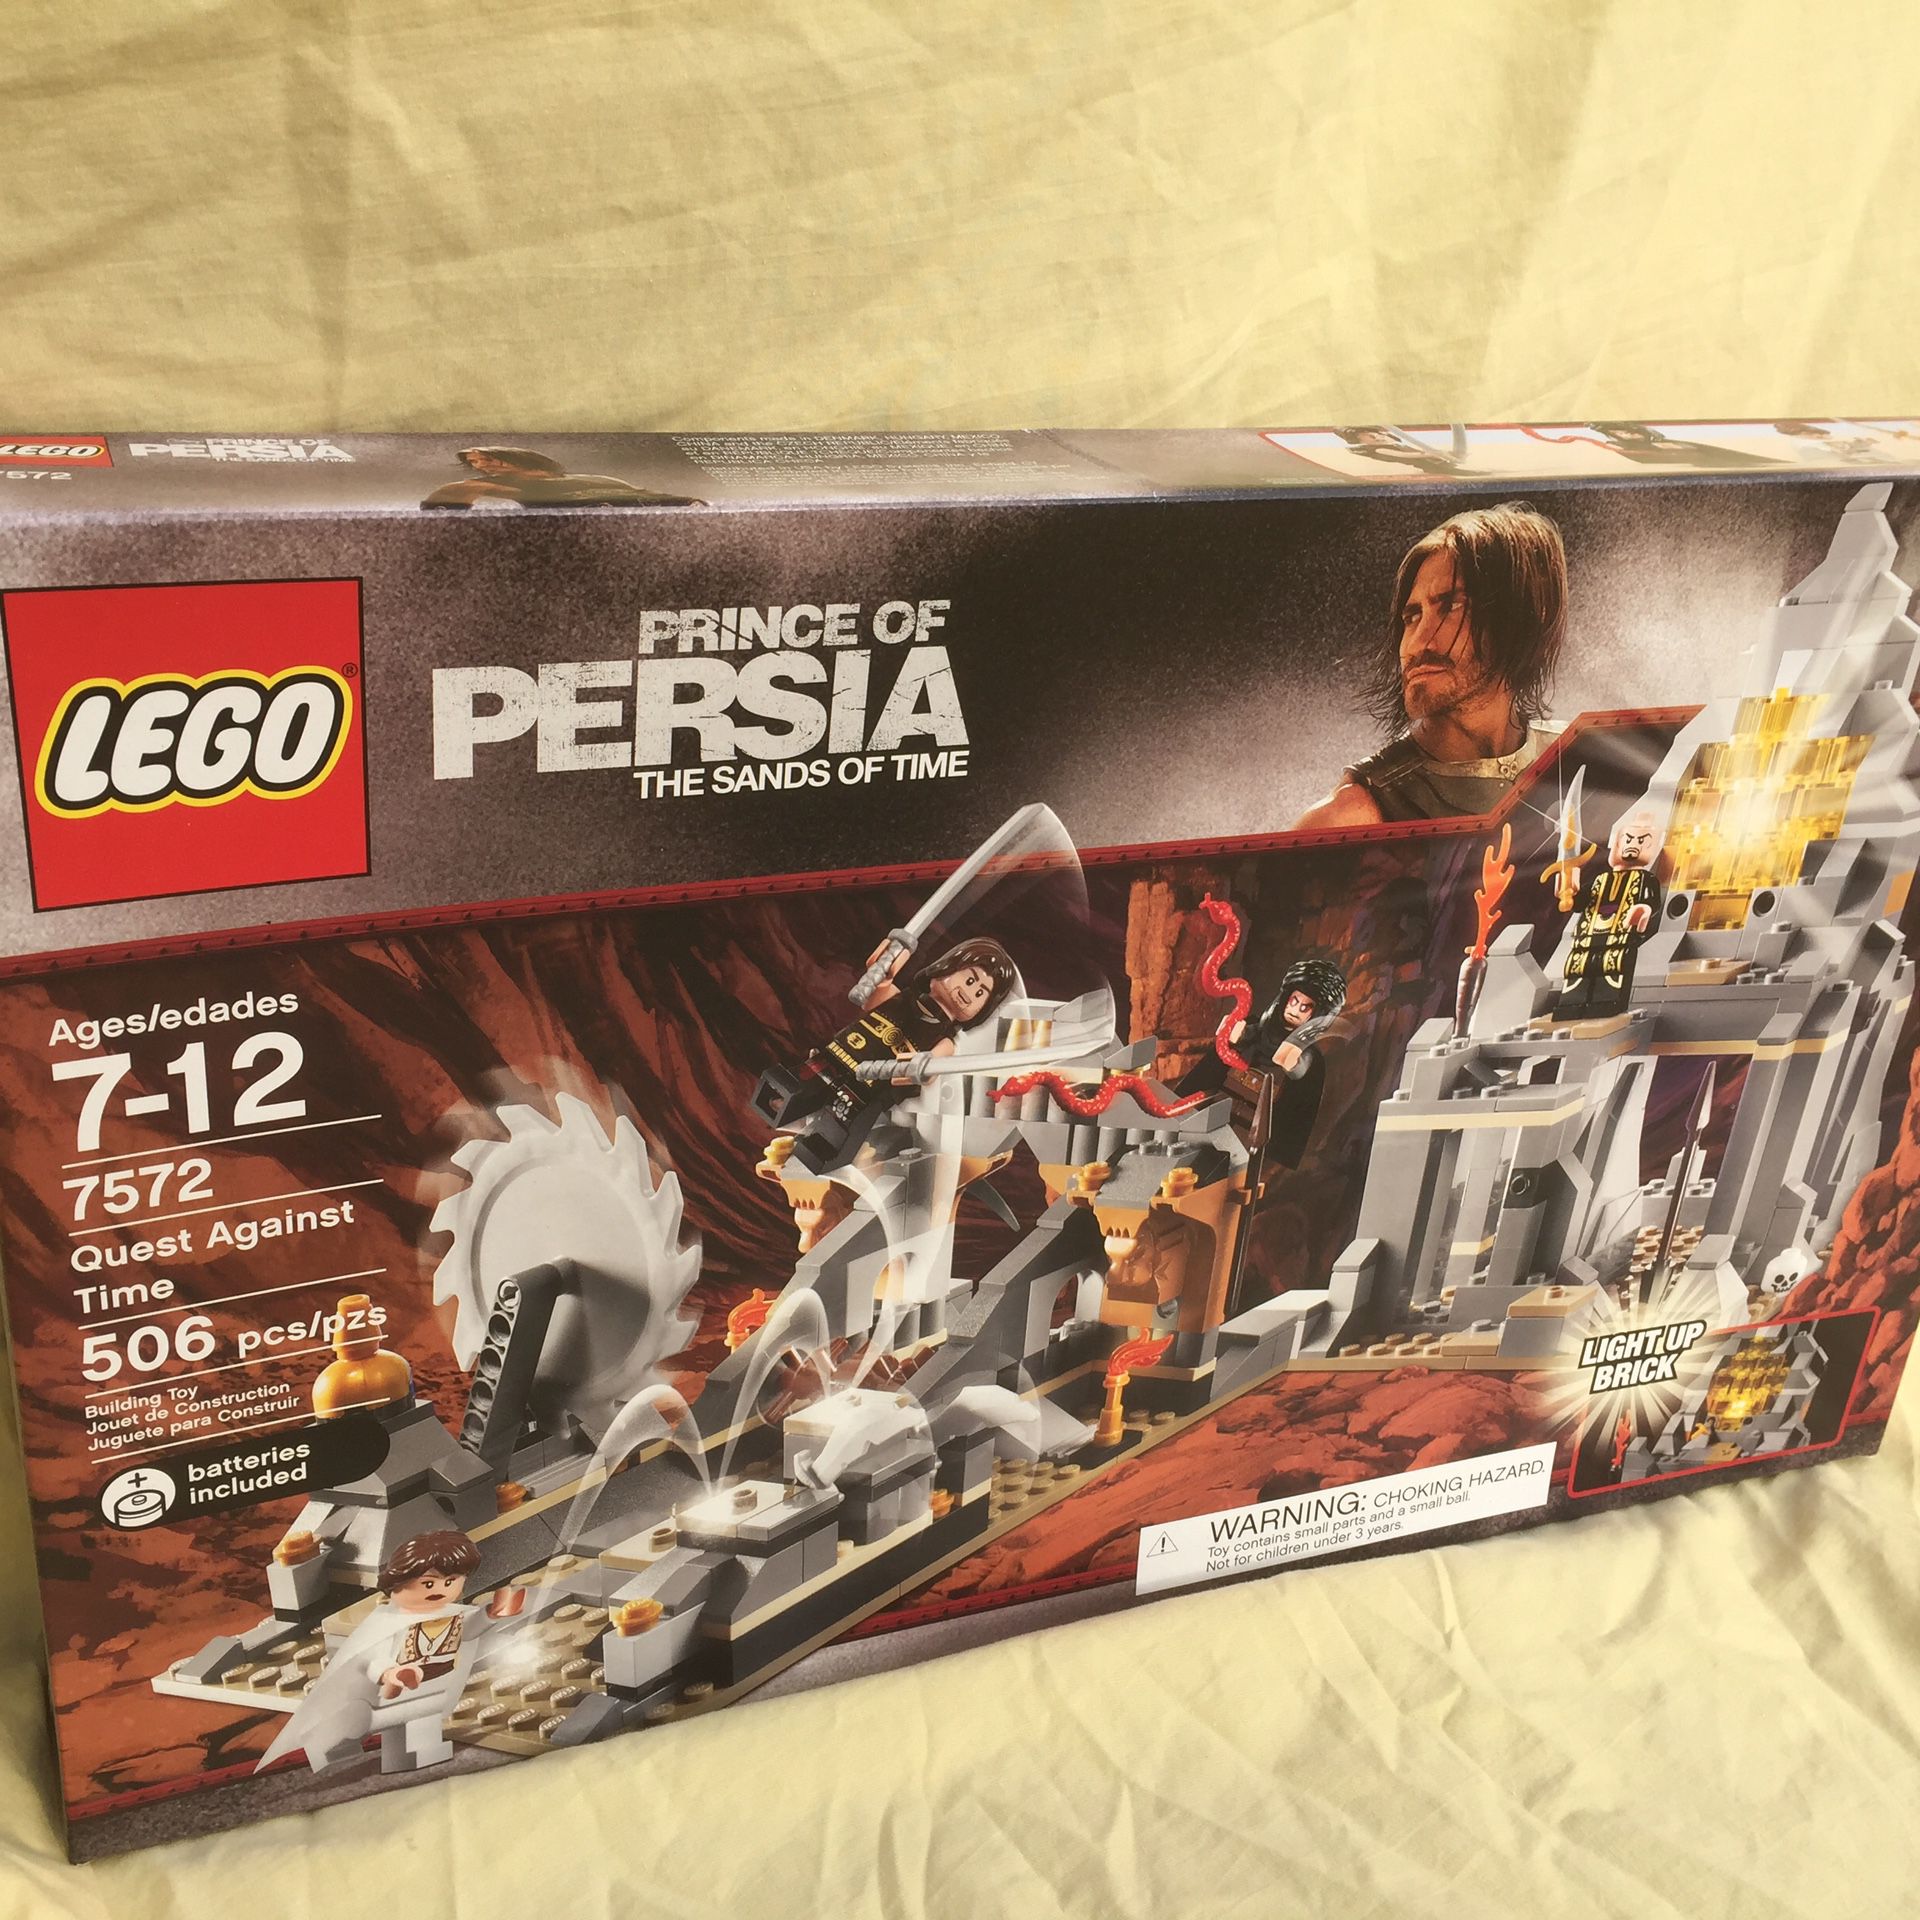 LEGO Prince of Persia Quest Against Time Set 7572 - LIGHT-UP Brick! New In Box - OBO for Sale in STA, NY - OfferUp